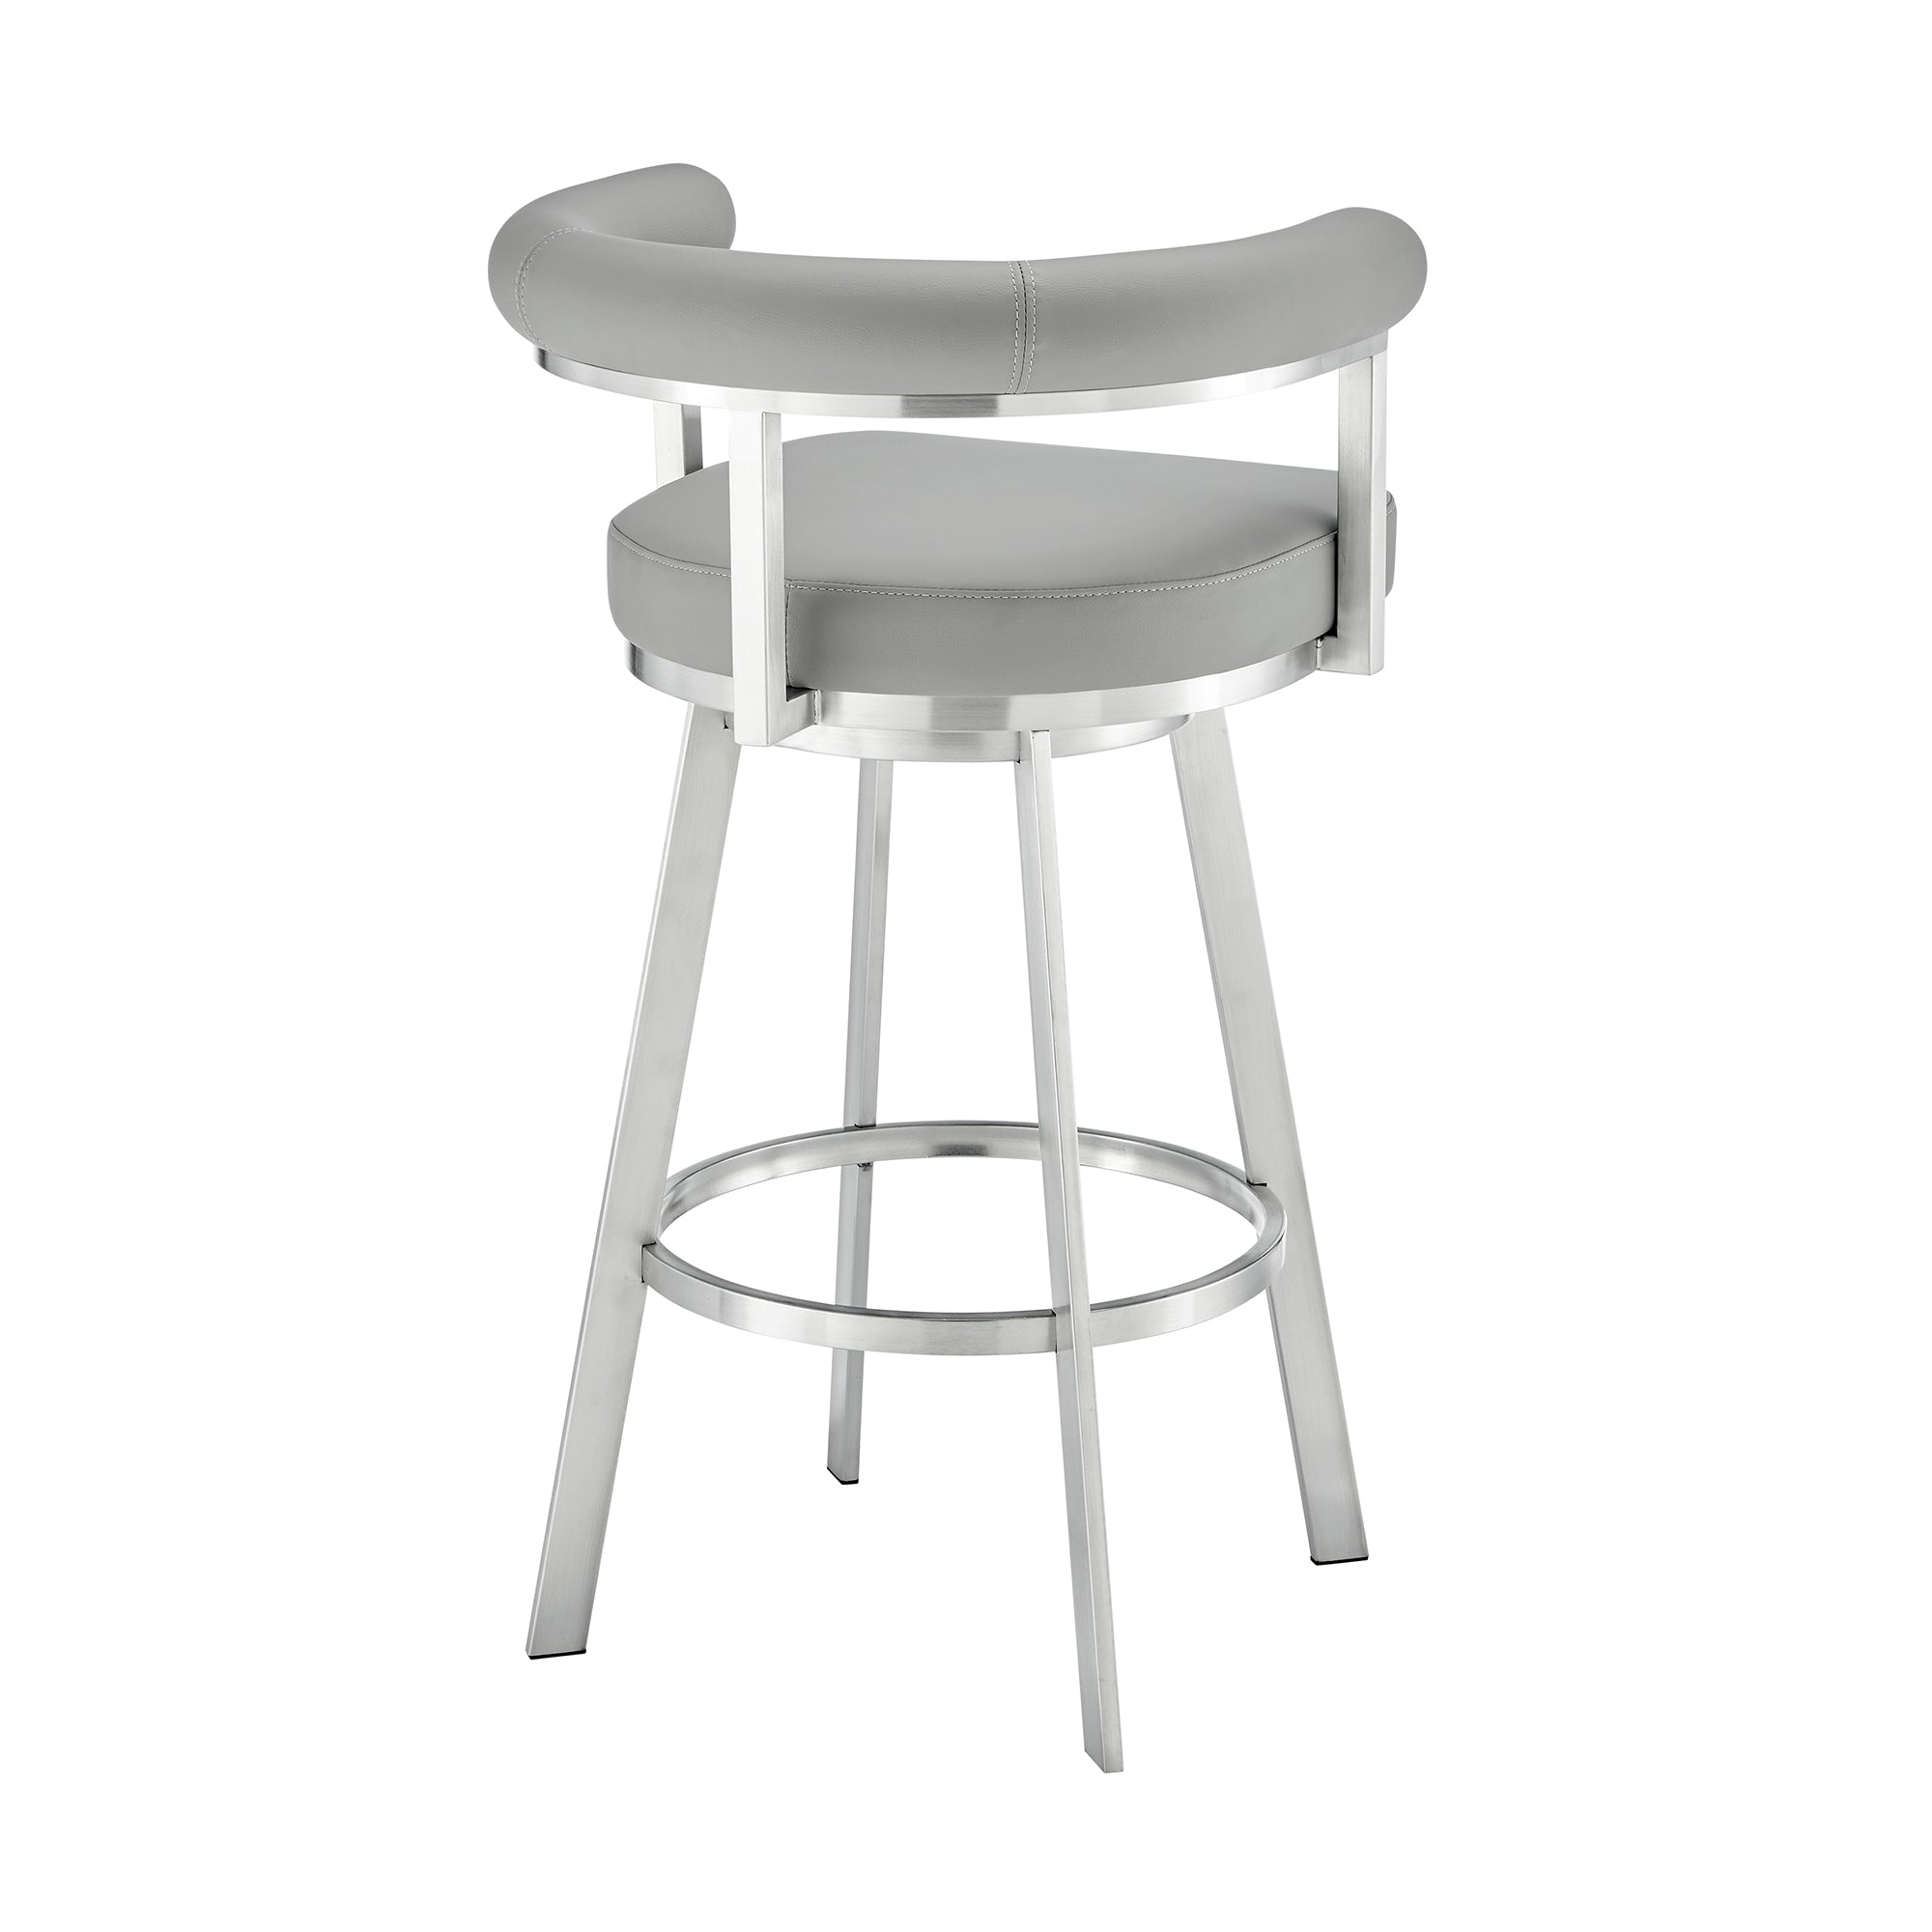 Armen Living - Nolagam Swivel Counter or Bar Stool in Faux Leather and Metal - 840254335615